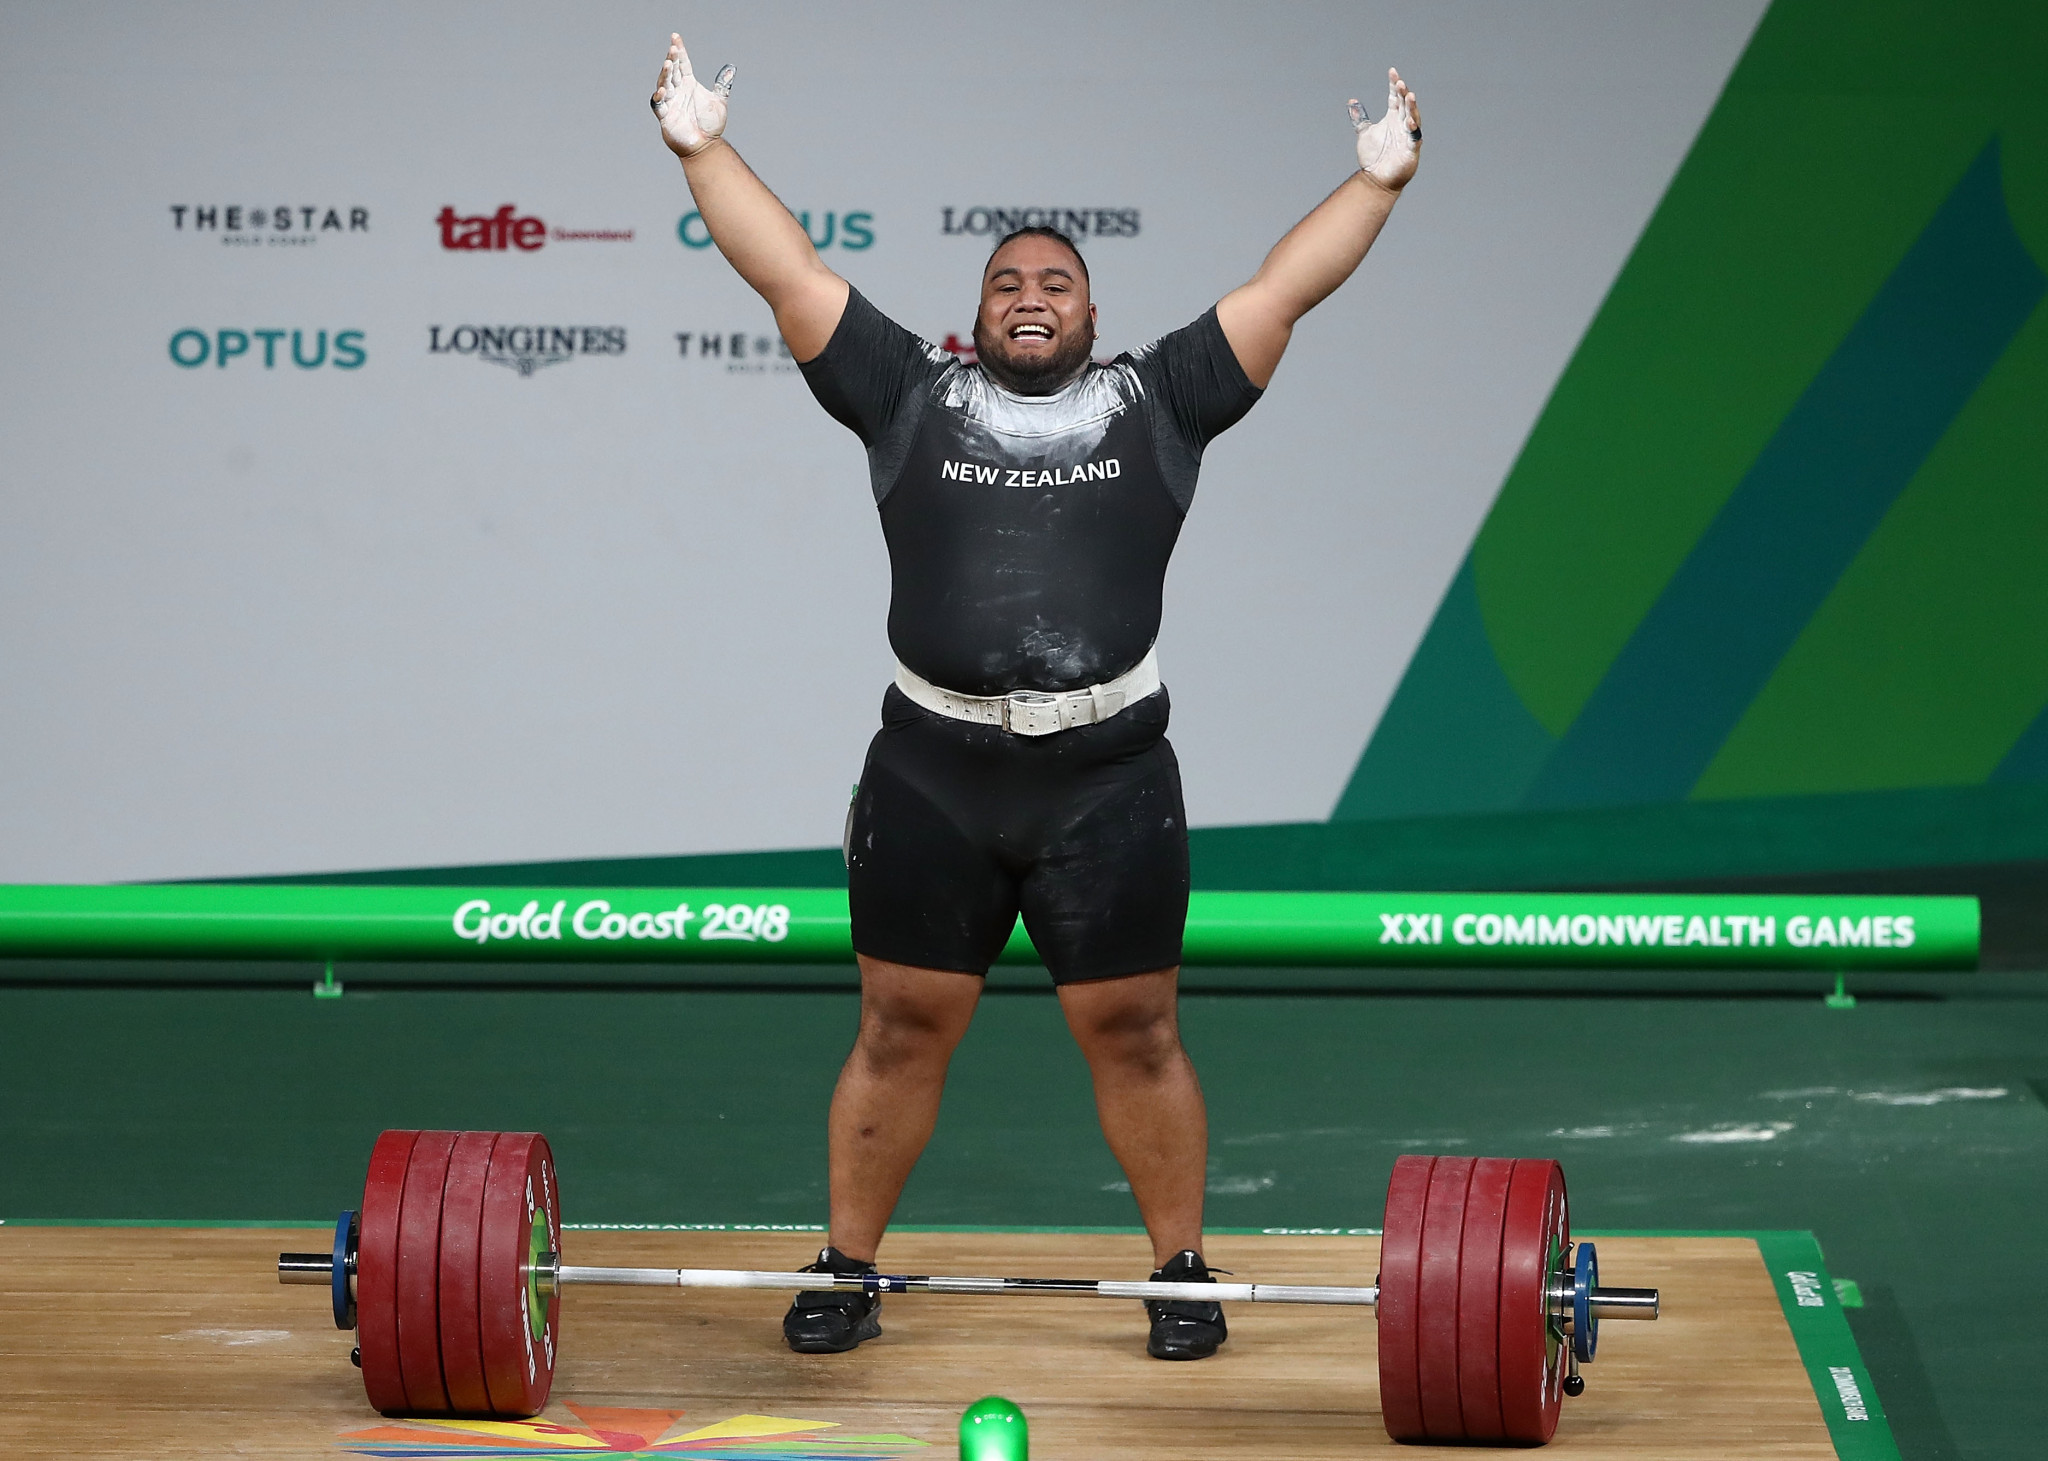 New Zealand's David Liti won the men's over 105kg event with a Commonwealth Games record total ©Getty Images